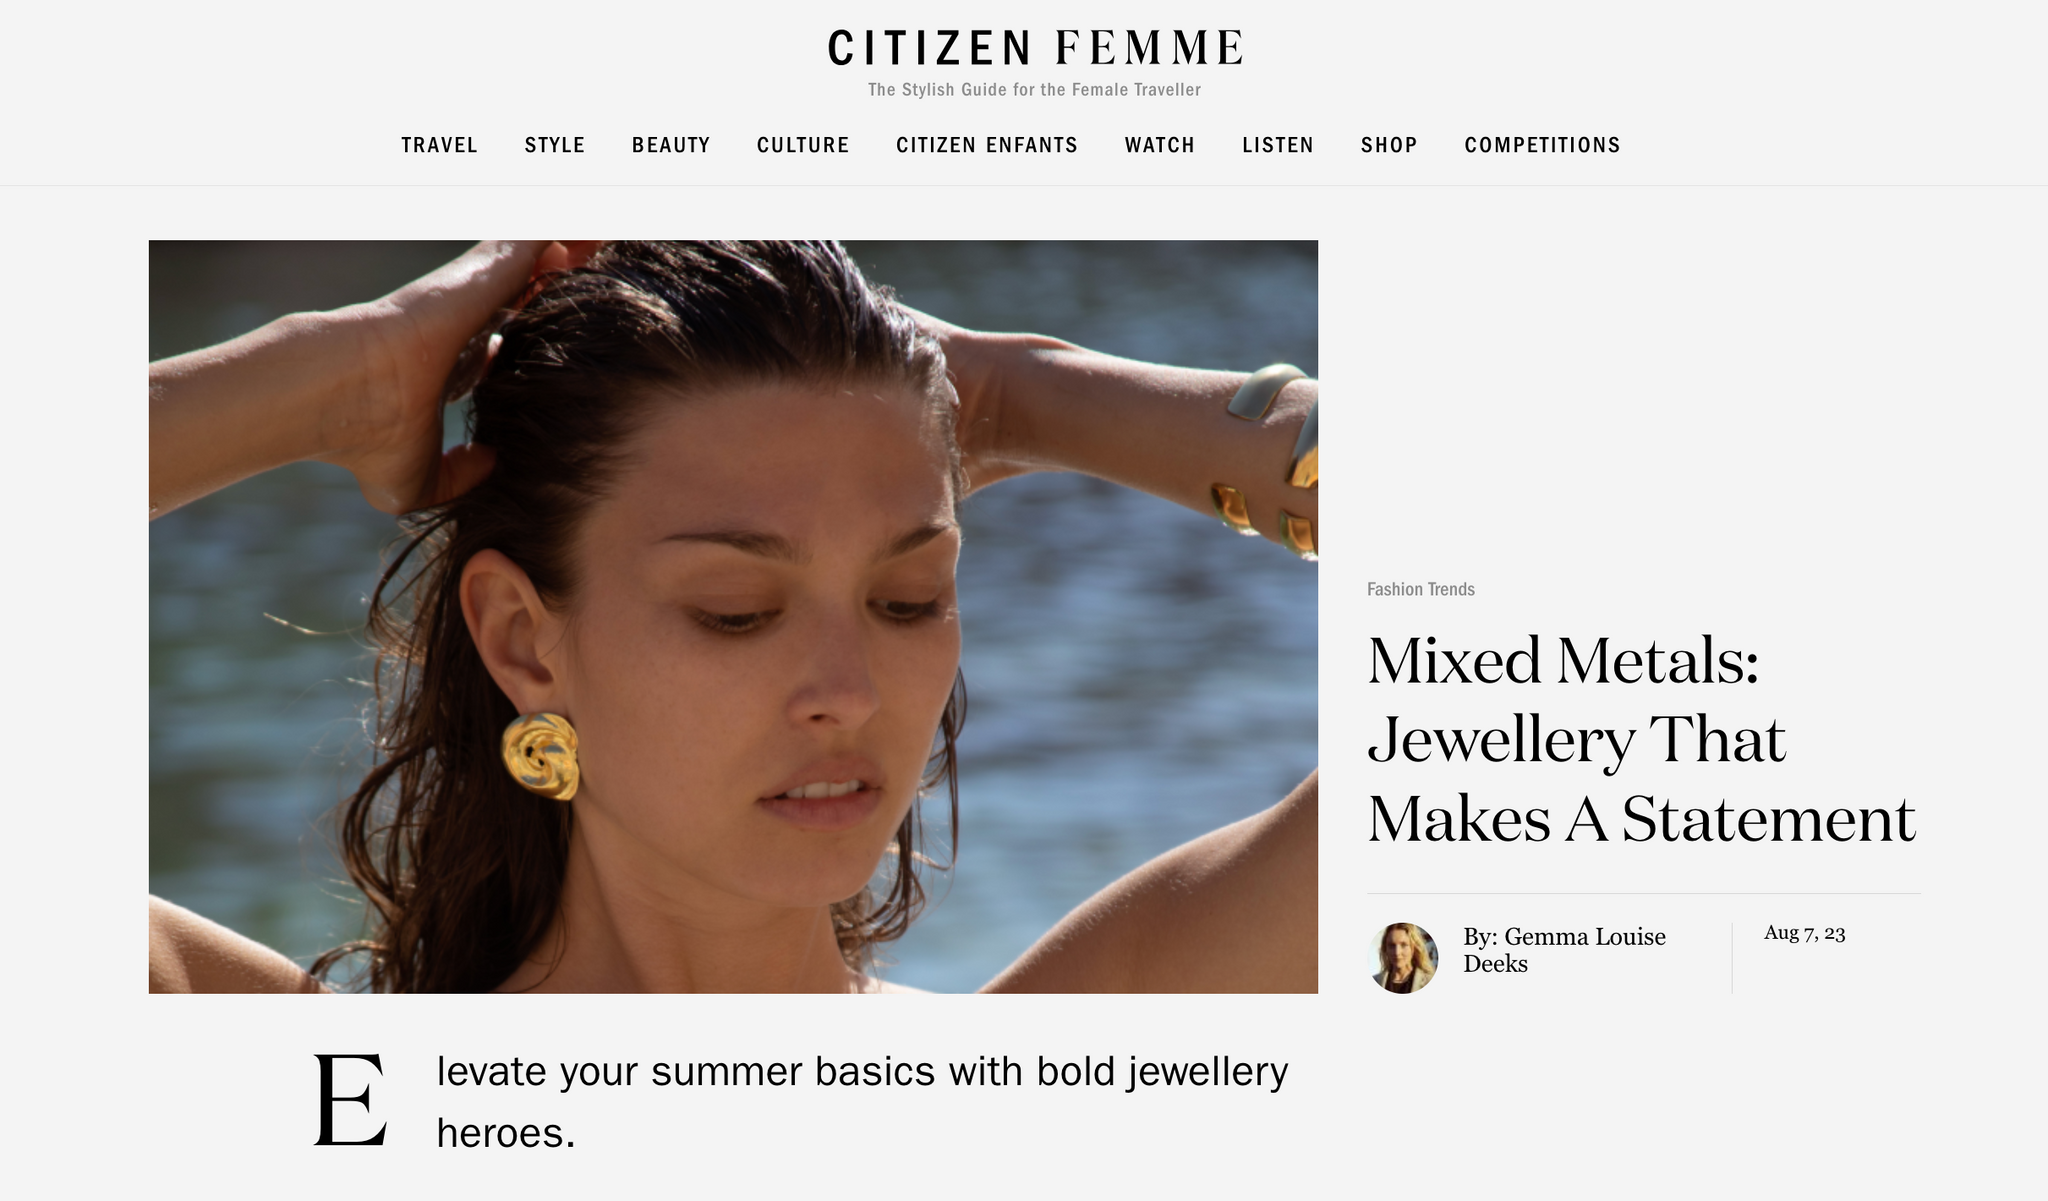 CITIZEN FEMME: Mixed Metals: Jewellery That Makes A Statement